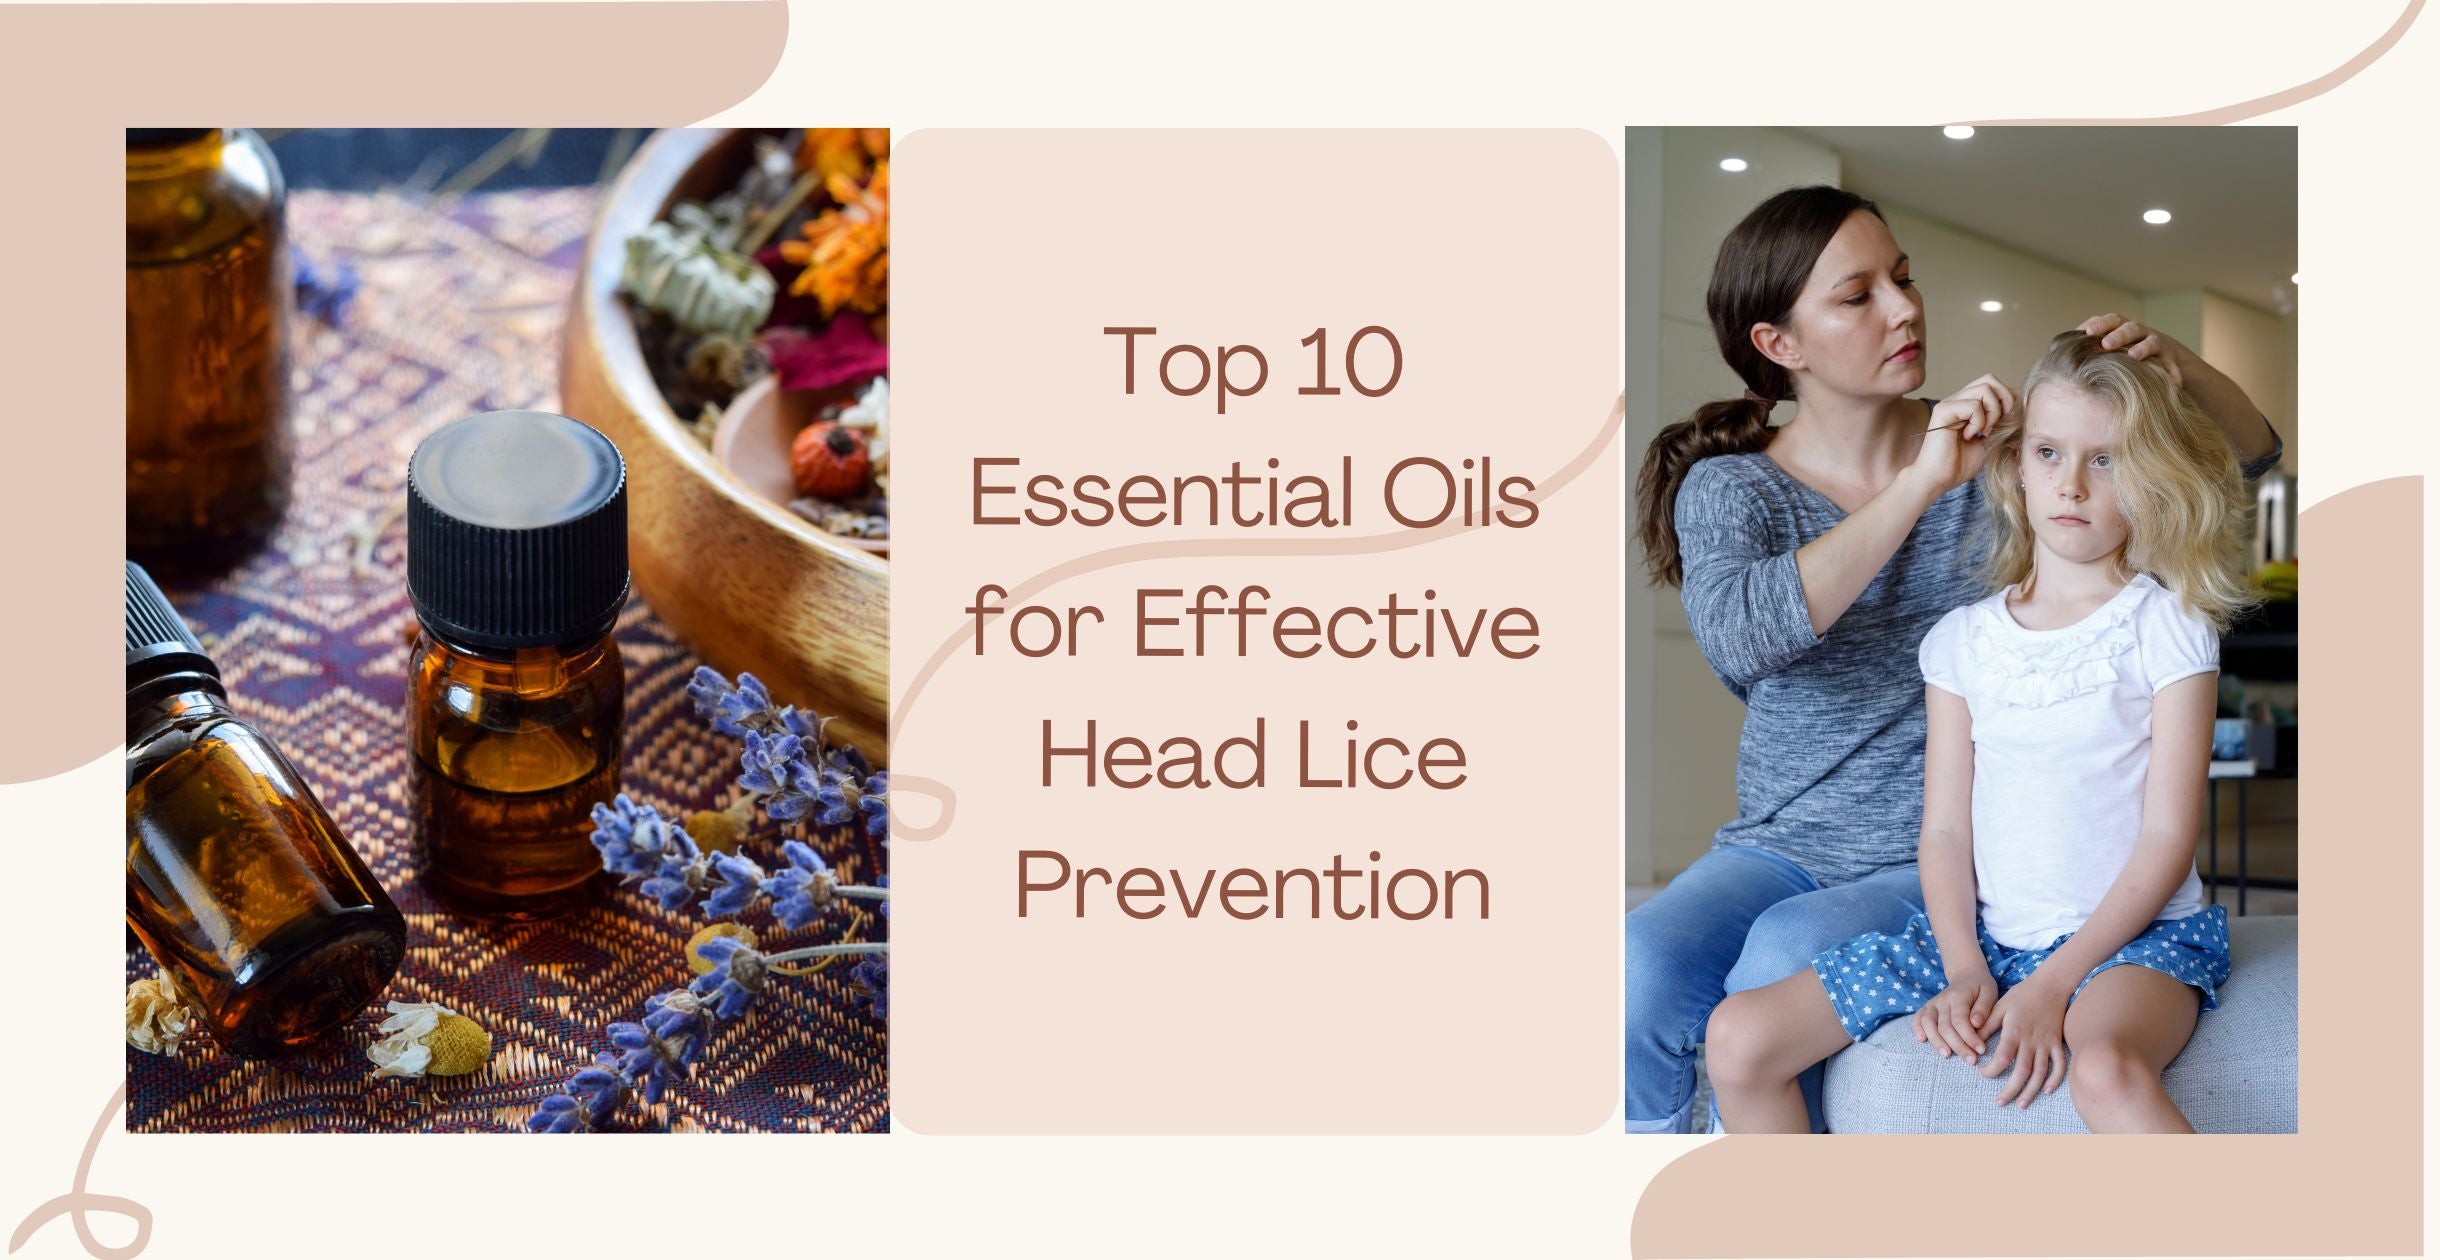 Top 10 Essential Oils for Effective Head Lice Prevention